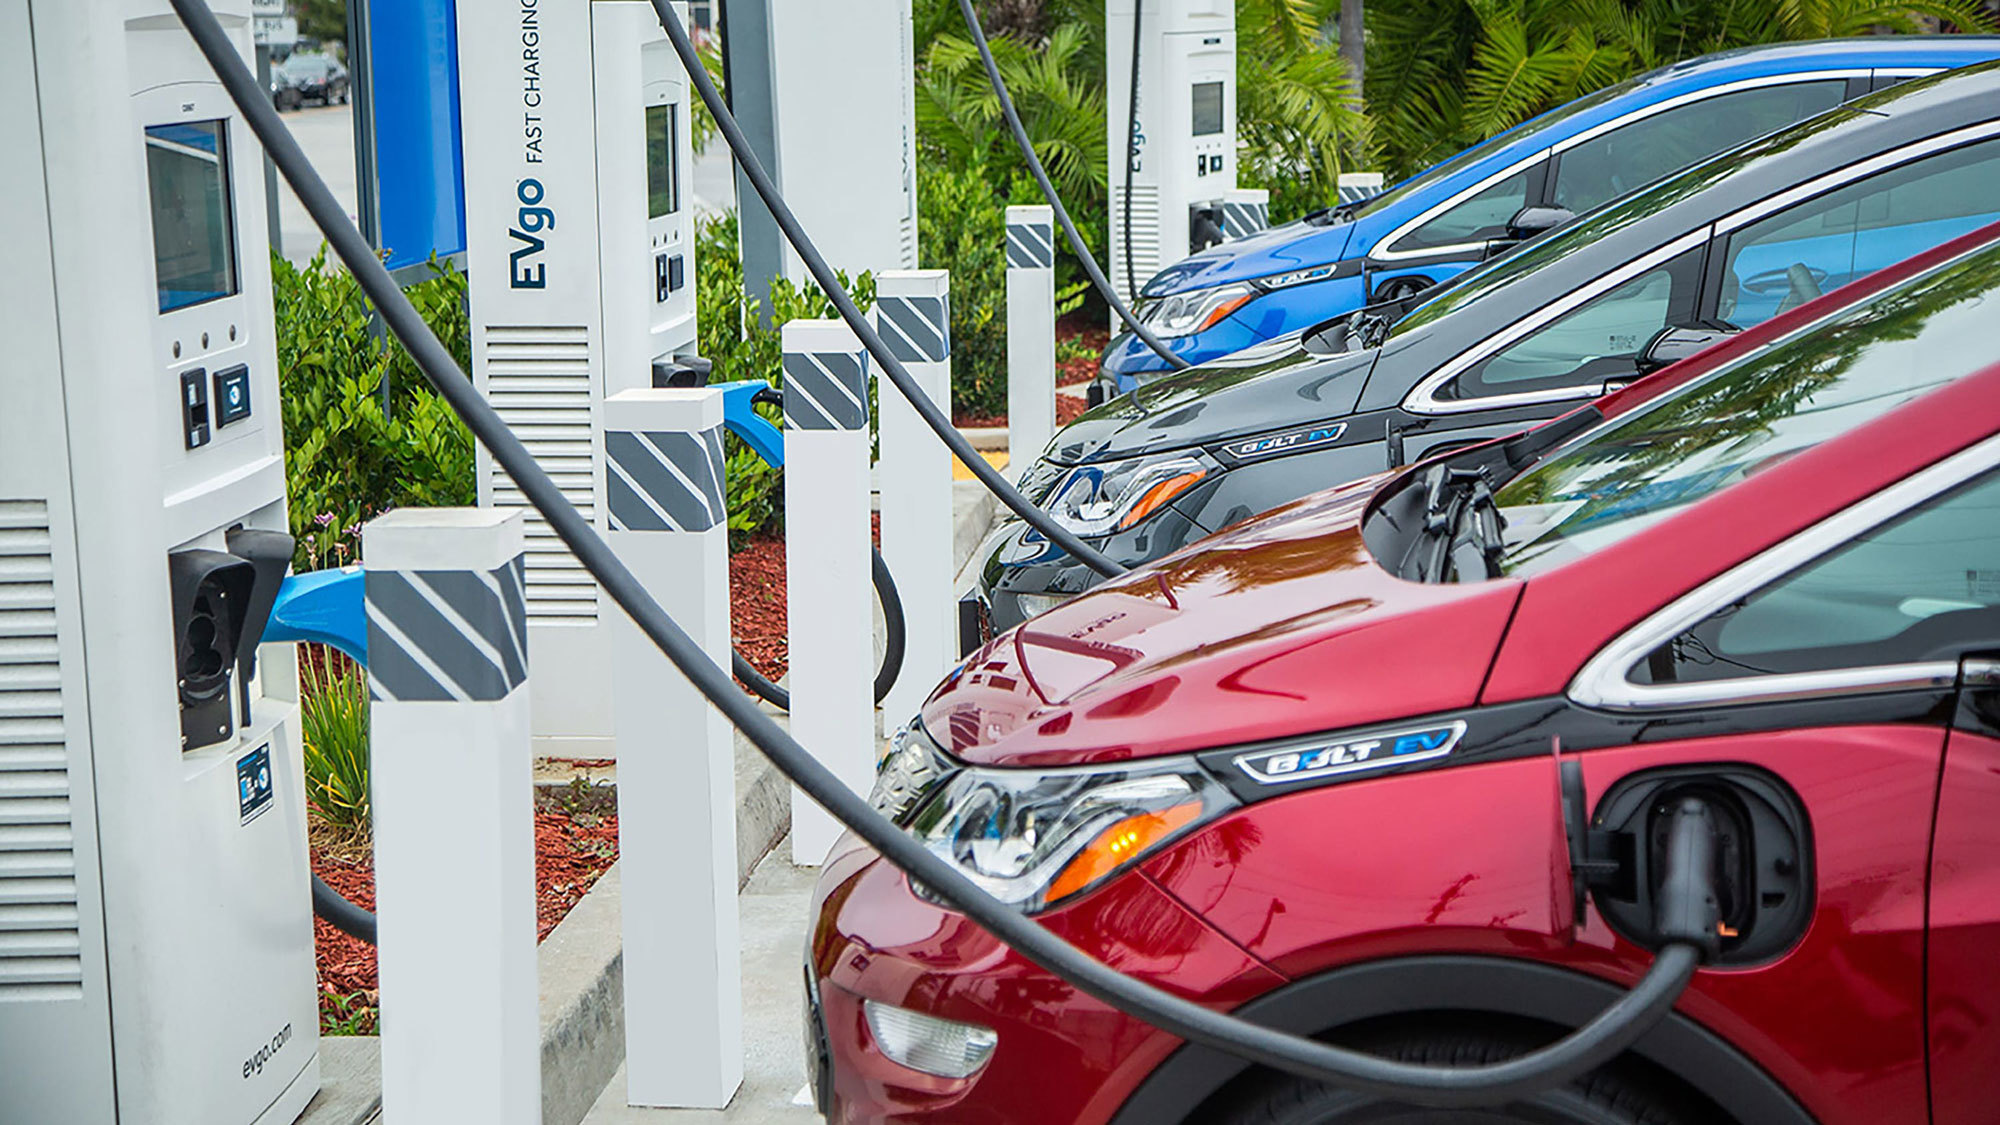 EV Turning Point: Momentum Builds for U.S. Electric Vehicle